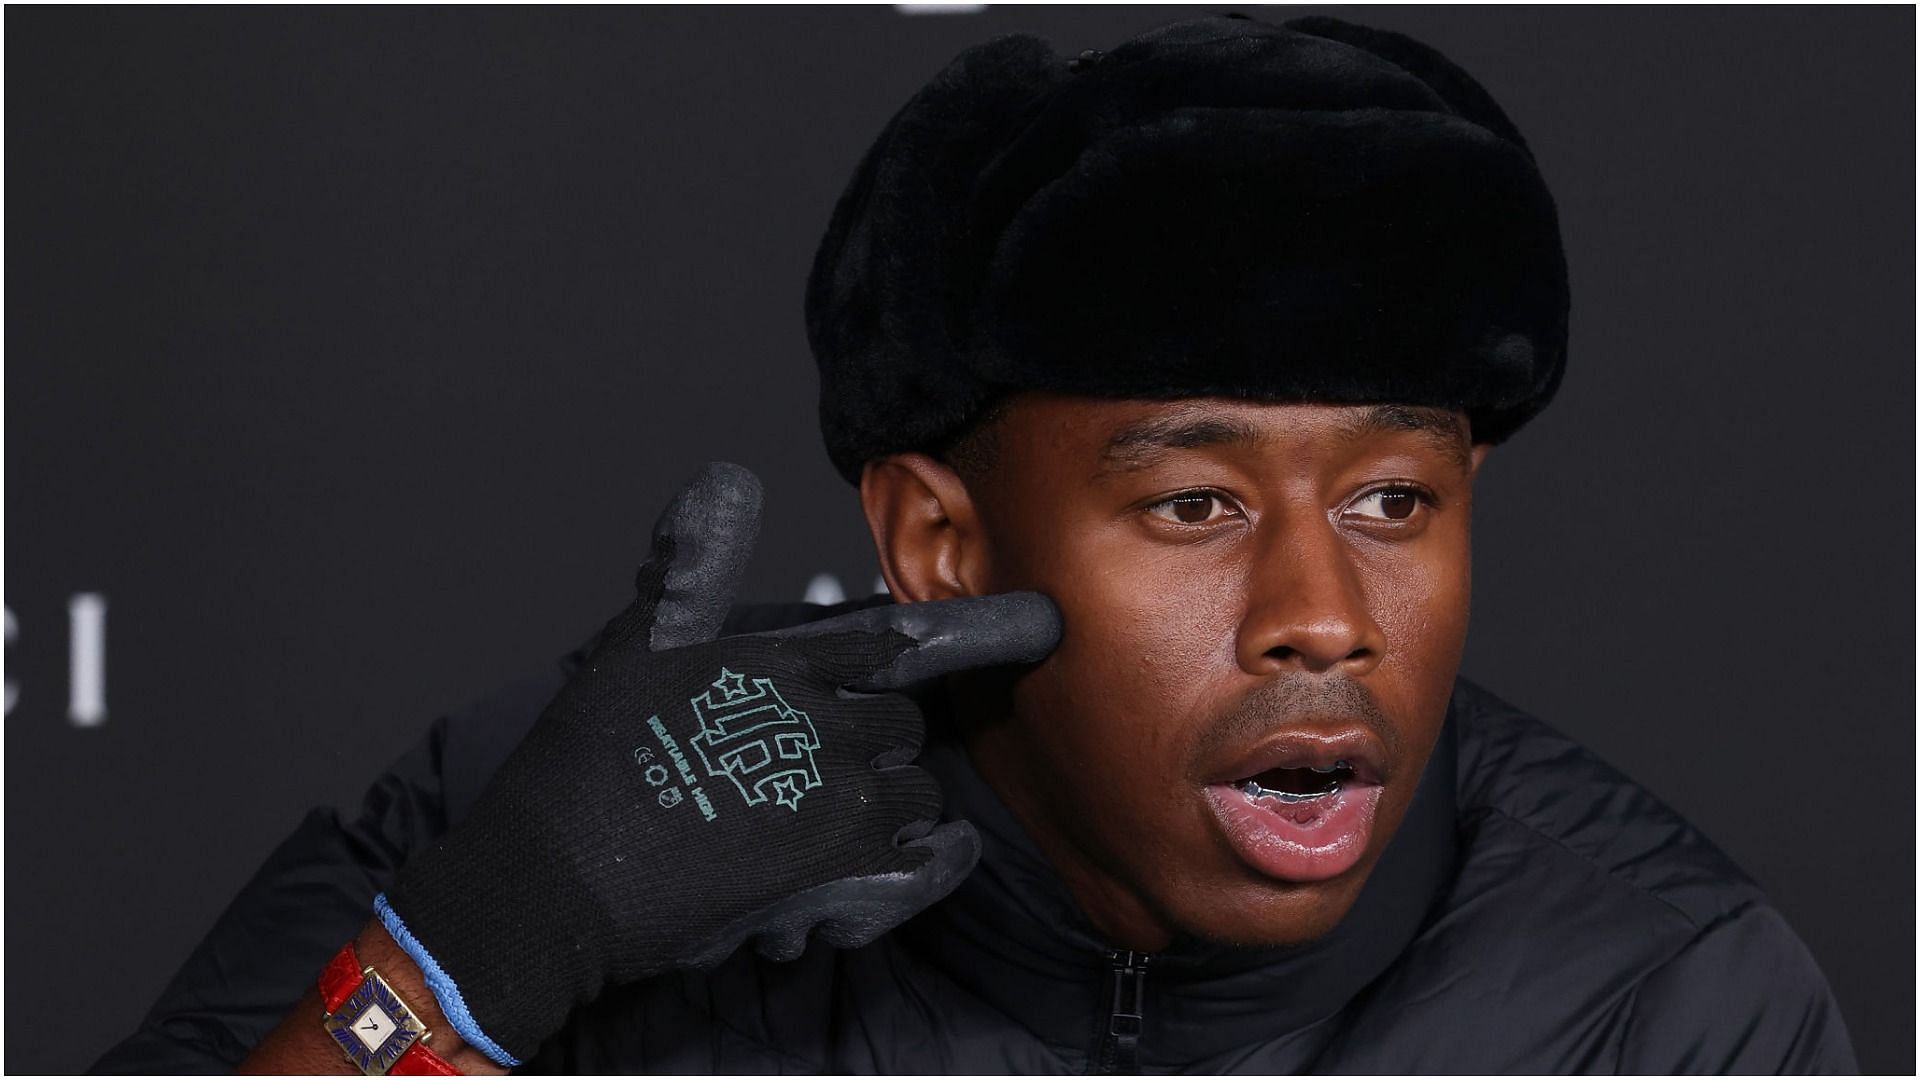 Tyler, the Creator attends the 2021 LACMA Art + Film Gala presented by Gucci at Los Angeles County Museum of Art (Image via Taylor Hill/Getty Images)